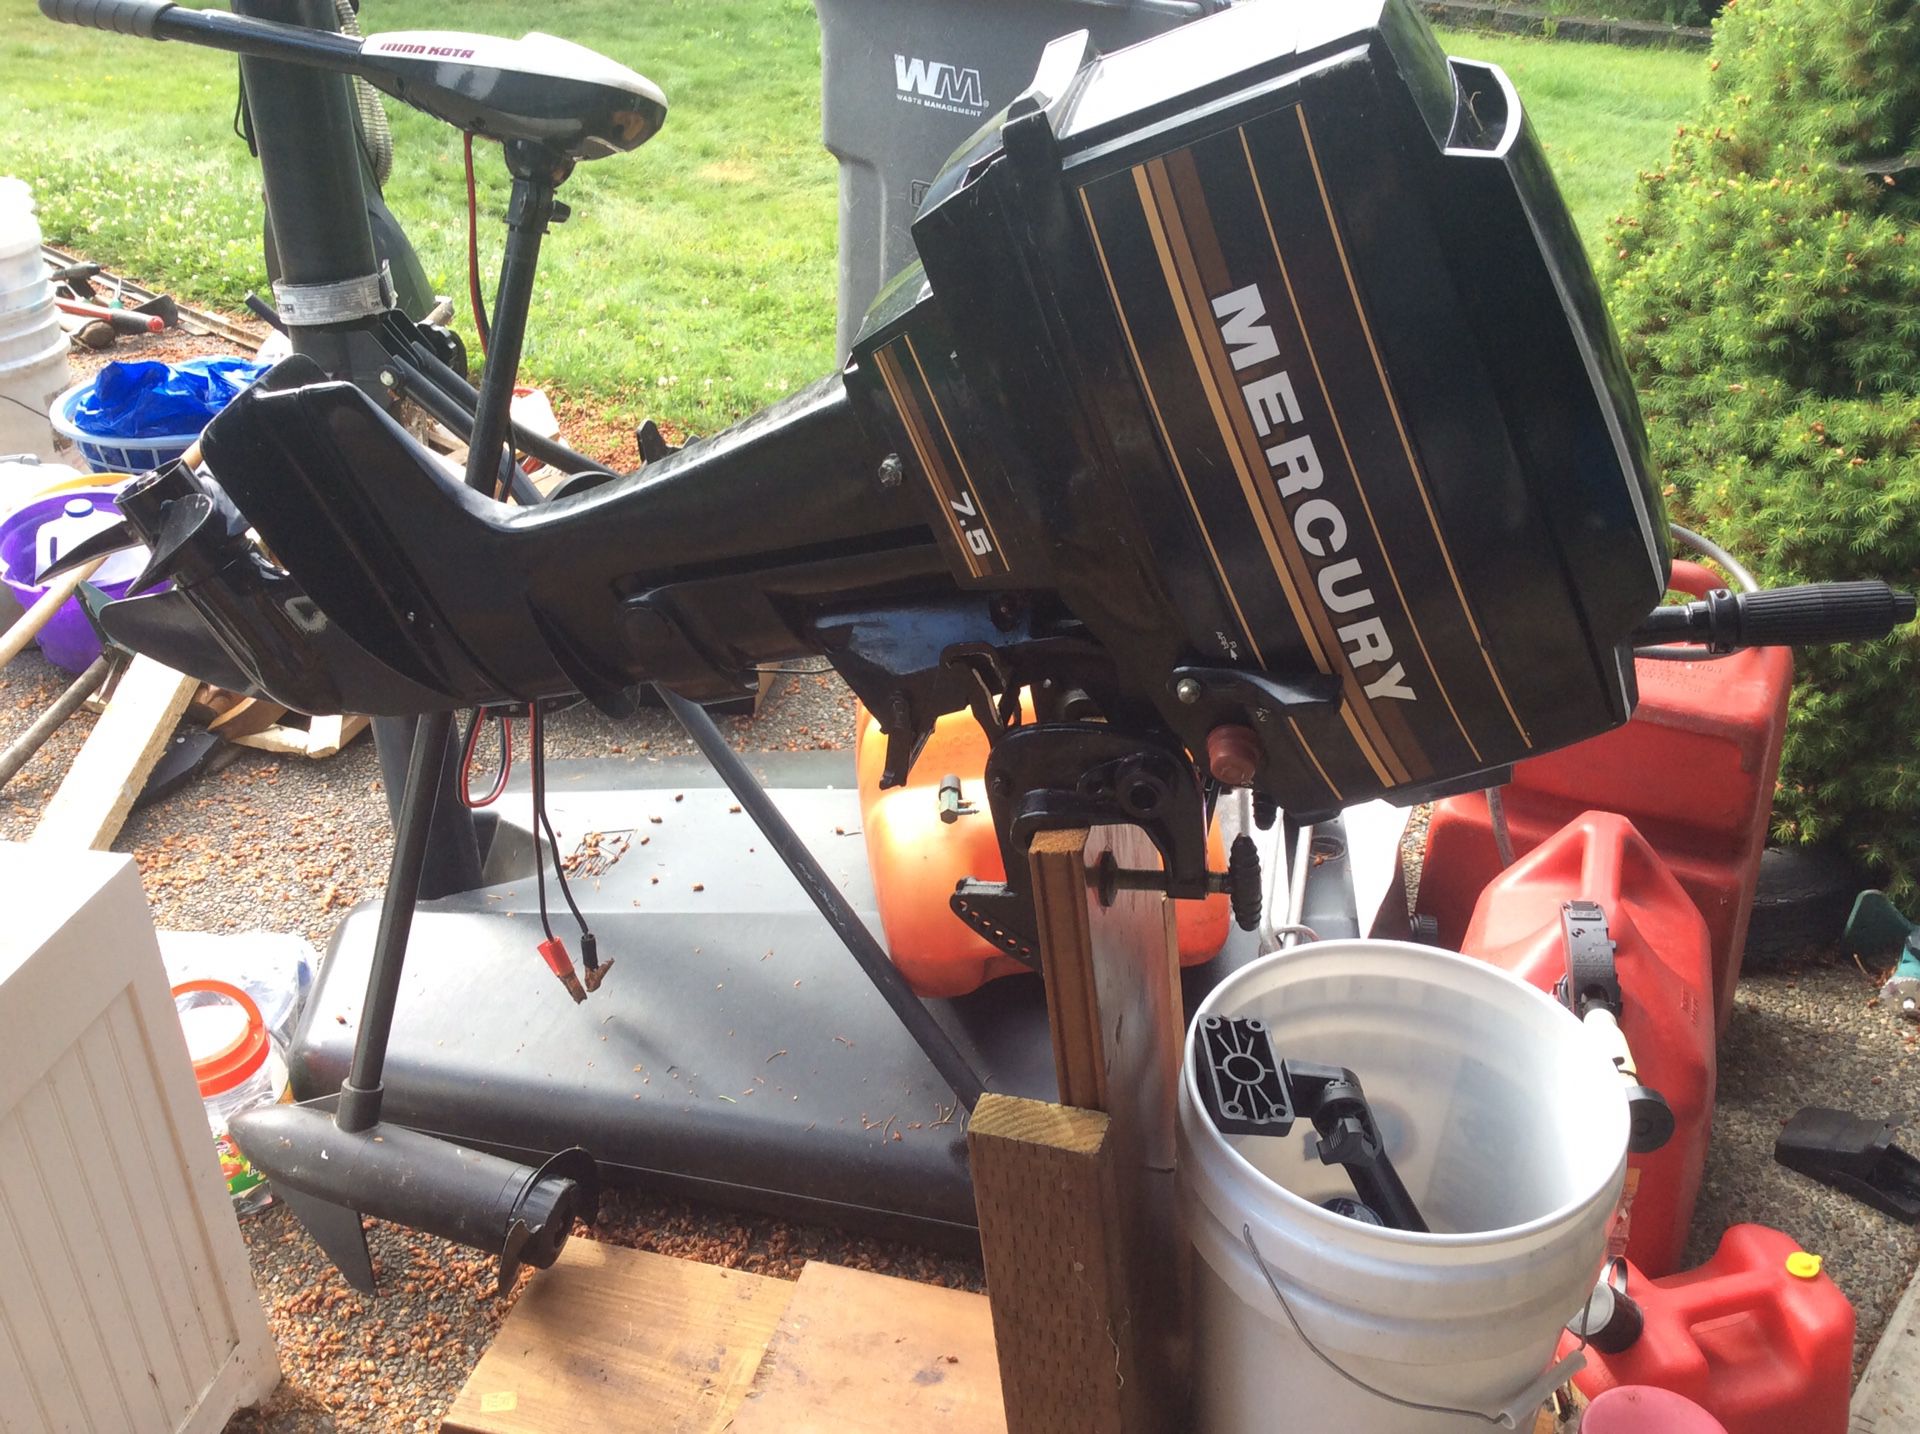 1985 Mercury 7.5 hp outboard motor, short shaft. Low hours. Rarely used. Second owner.